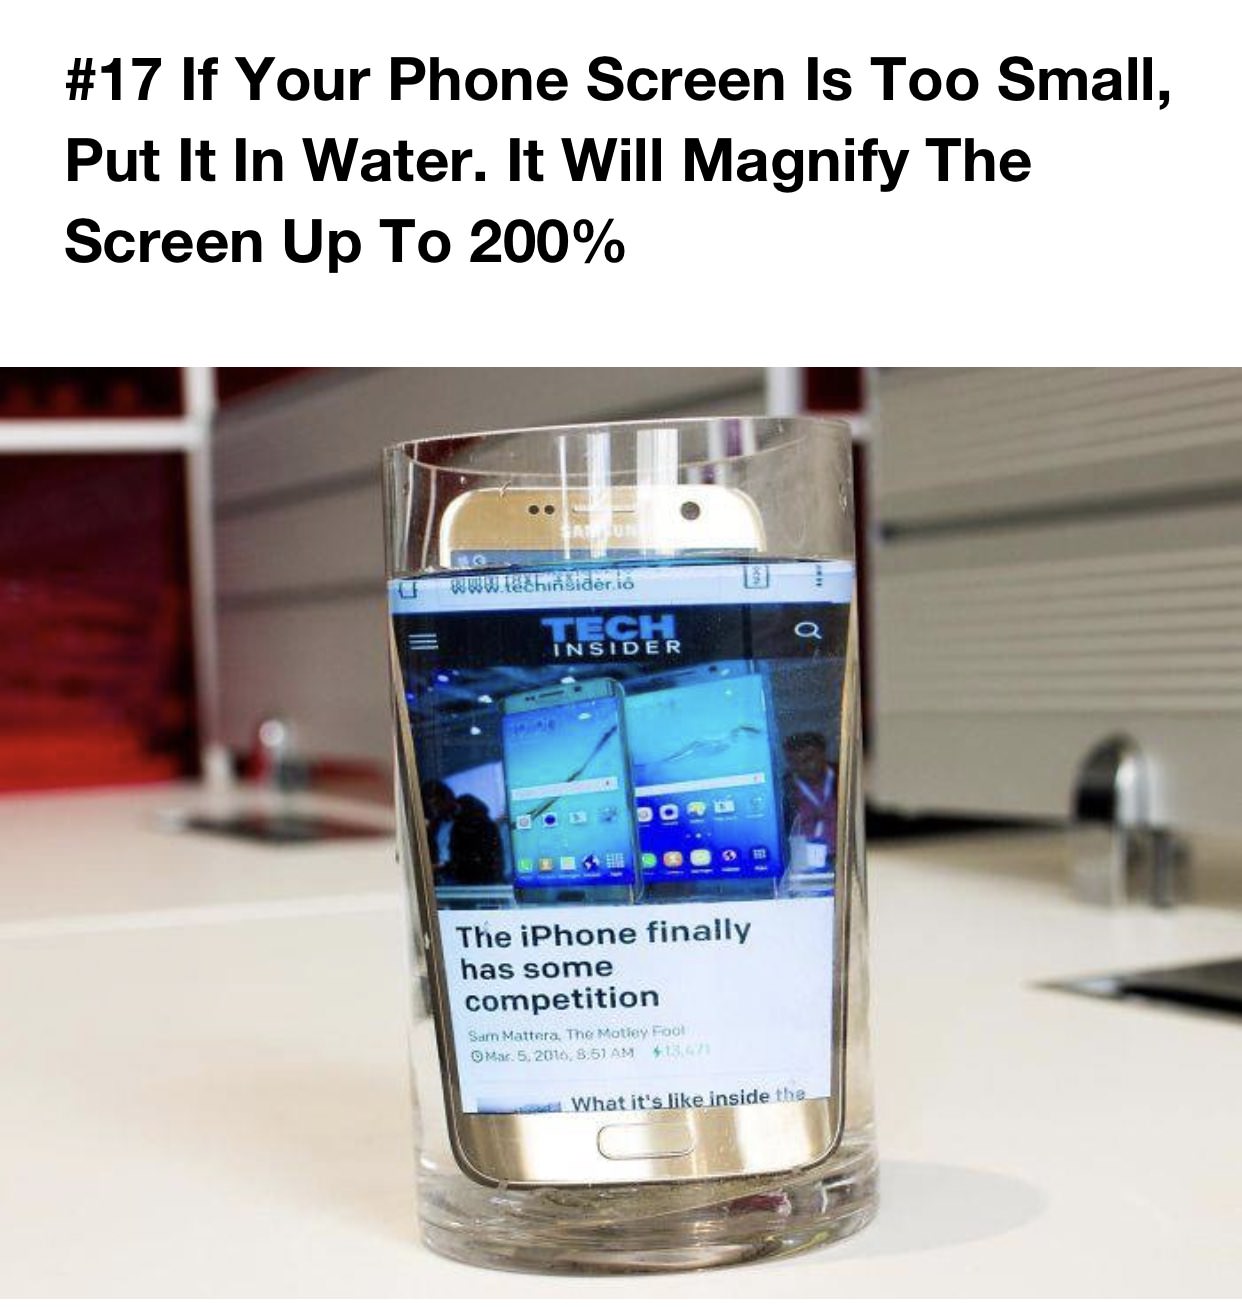 samsung water resistant - If Your Phone Screen Is Too Small, Put It In Water. It Will Magnify The Screen Up To 200% Tecer e Odo The iPhone finally has some competition Sam Mattera, The Motley Foot Mar. 5. 2016, 8,51 Am 130 What it's inside the